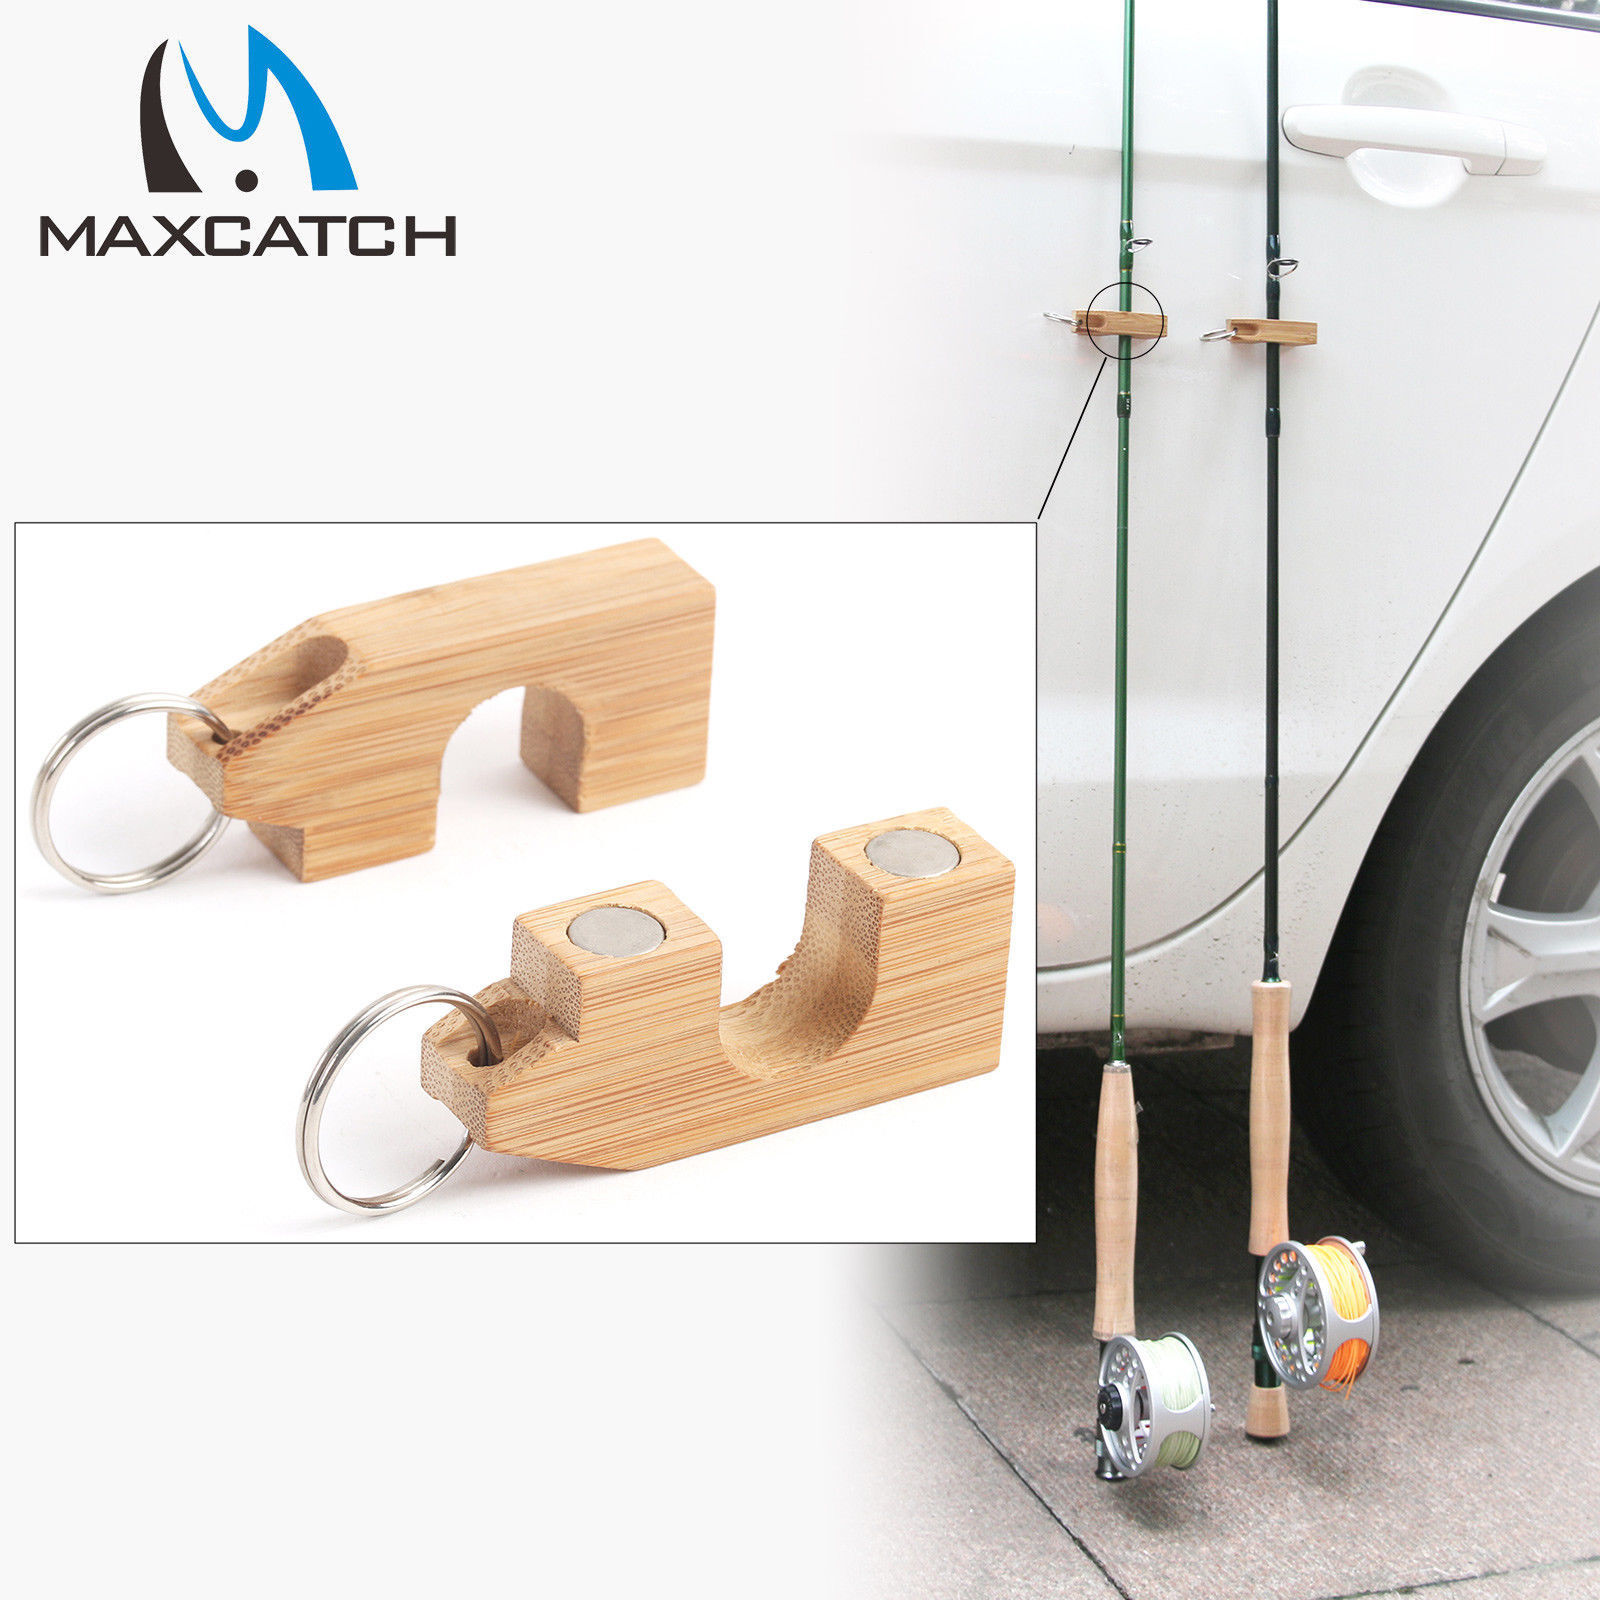 Maxcatch 2pcs Portable Bamboo Fly Fishing Magnetic Rod Guard Fishing Rod Holder Maxcatch Does Not Apply